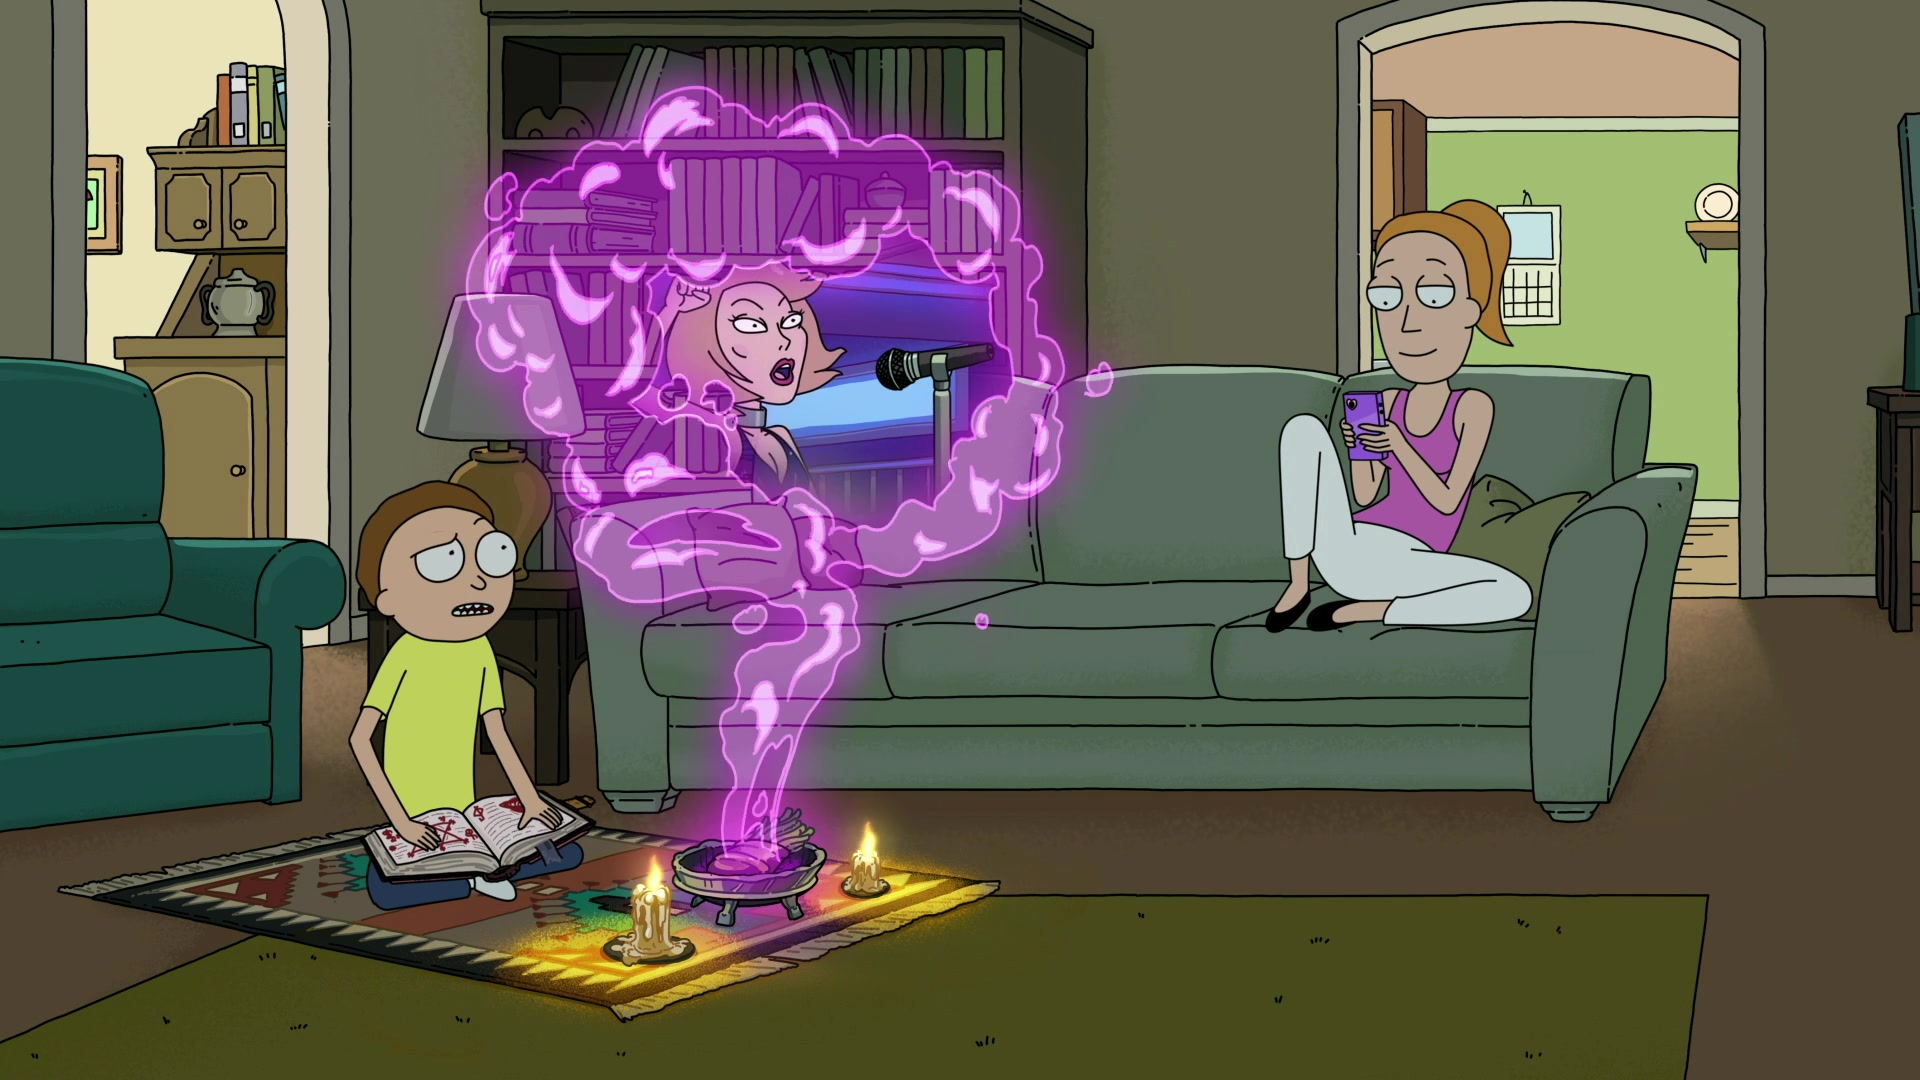 Morty (Justin Roiland) and Summer (Spencer Grammer) receive a GIF of Taylor Swift from Rick (Justin Roiland) in Rick and Morty Season 4 Episode 4 "Claw and Hoarder: Special Ricktim's Morty" (2019), Adult Swim